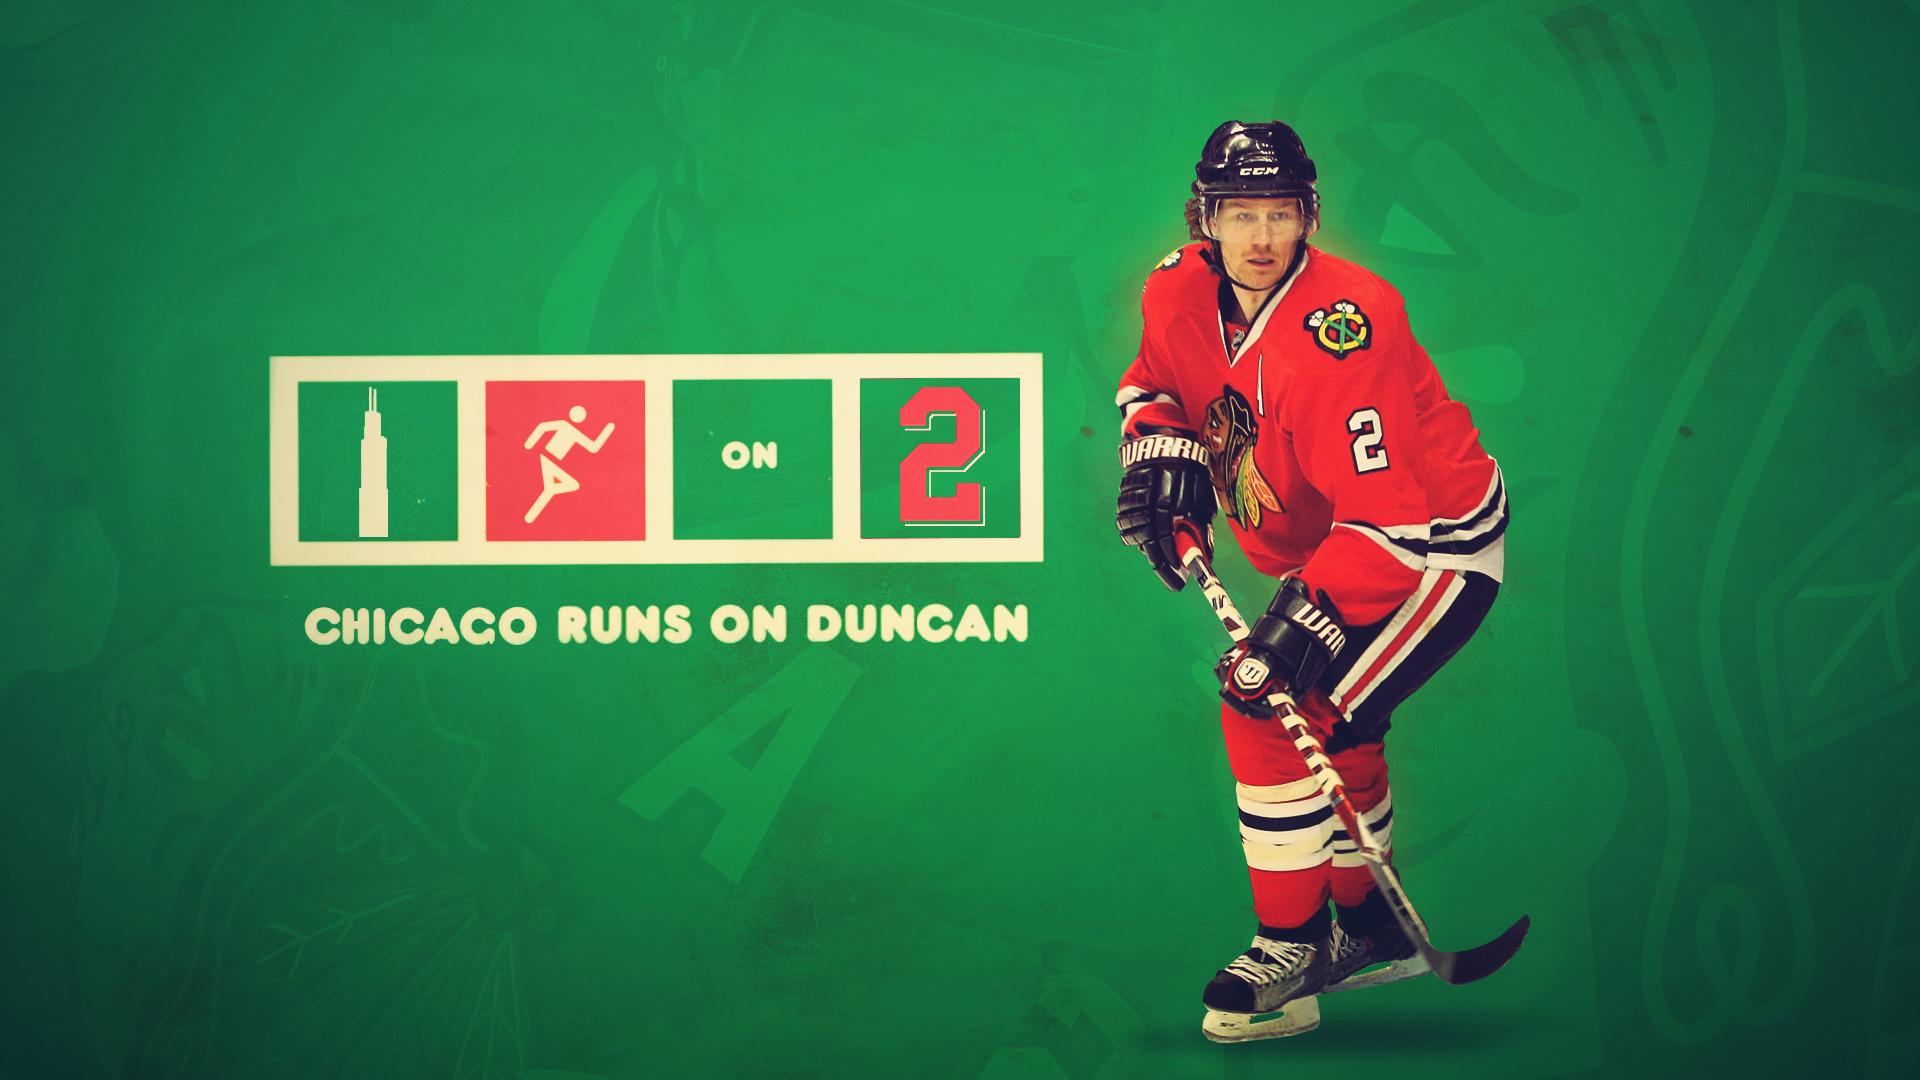 Duncan Keith wallpaper and image, picture, photo